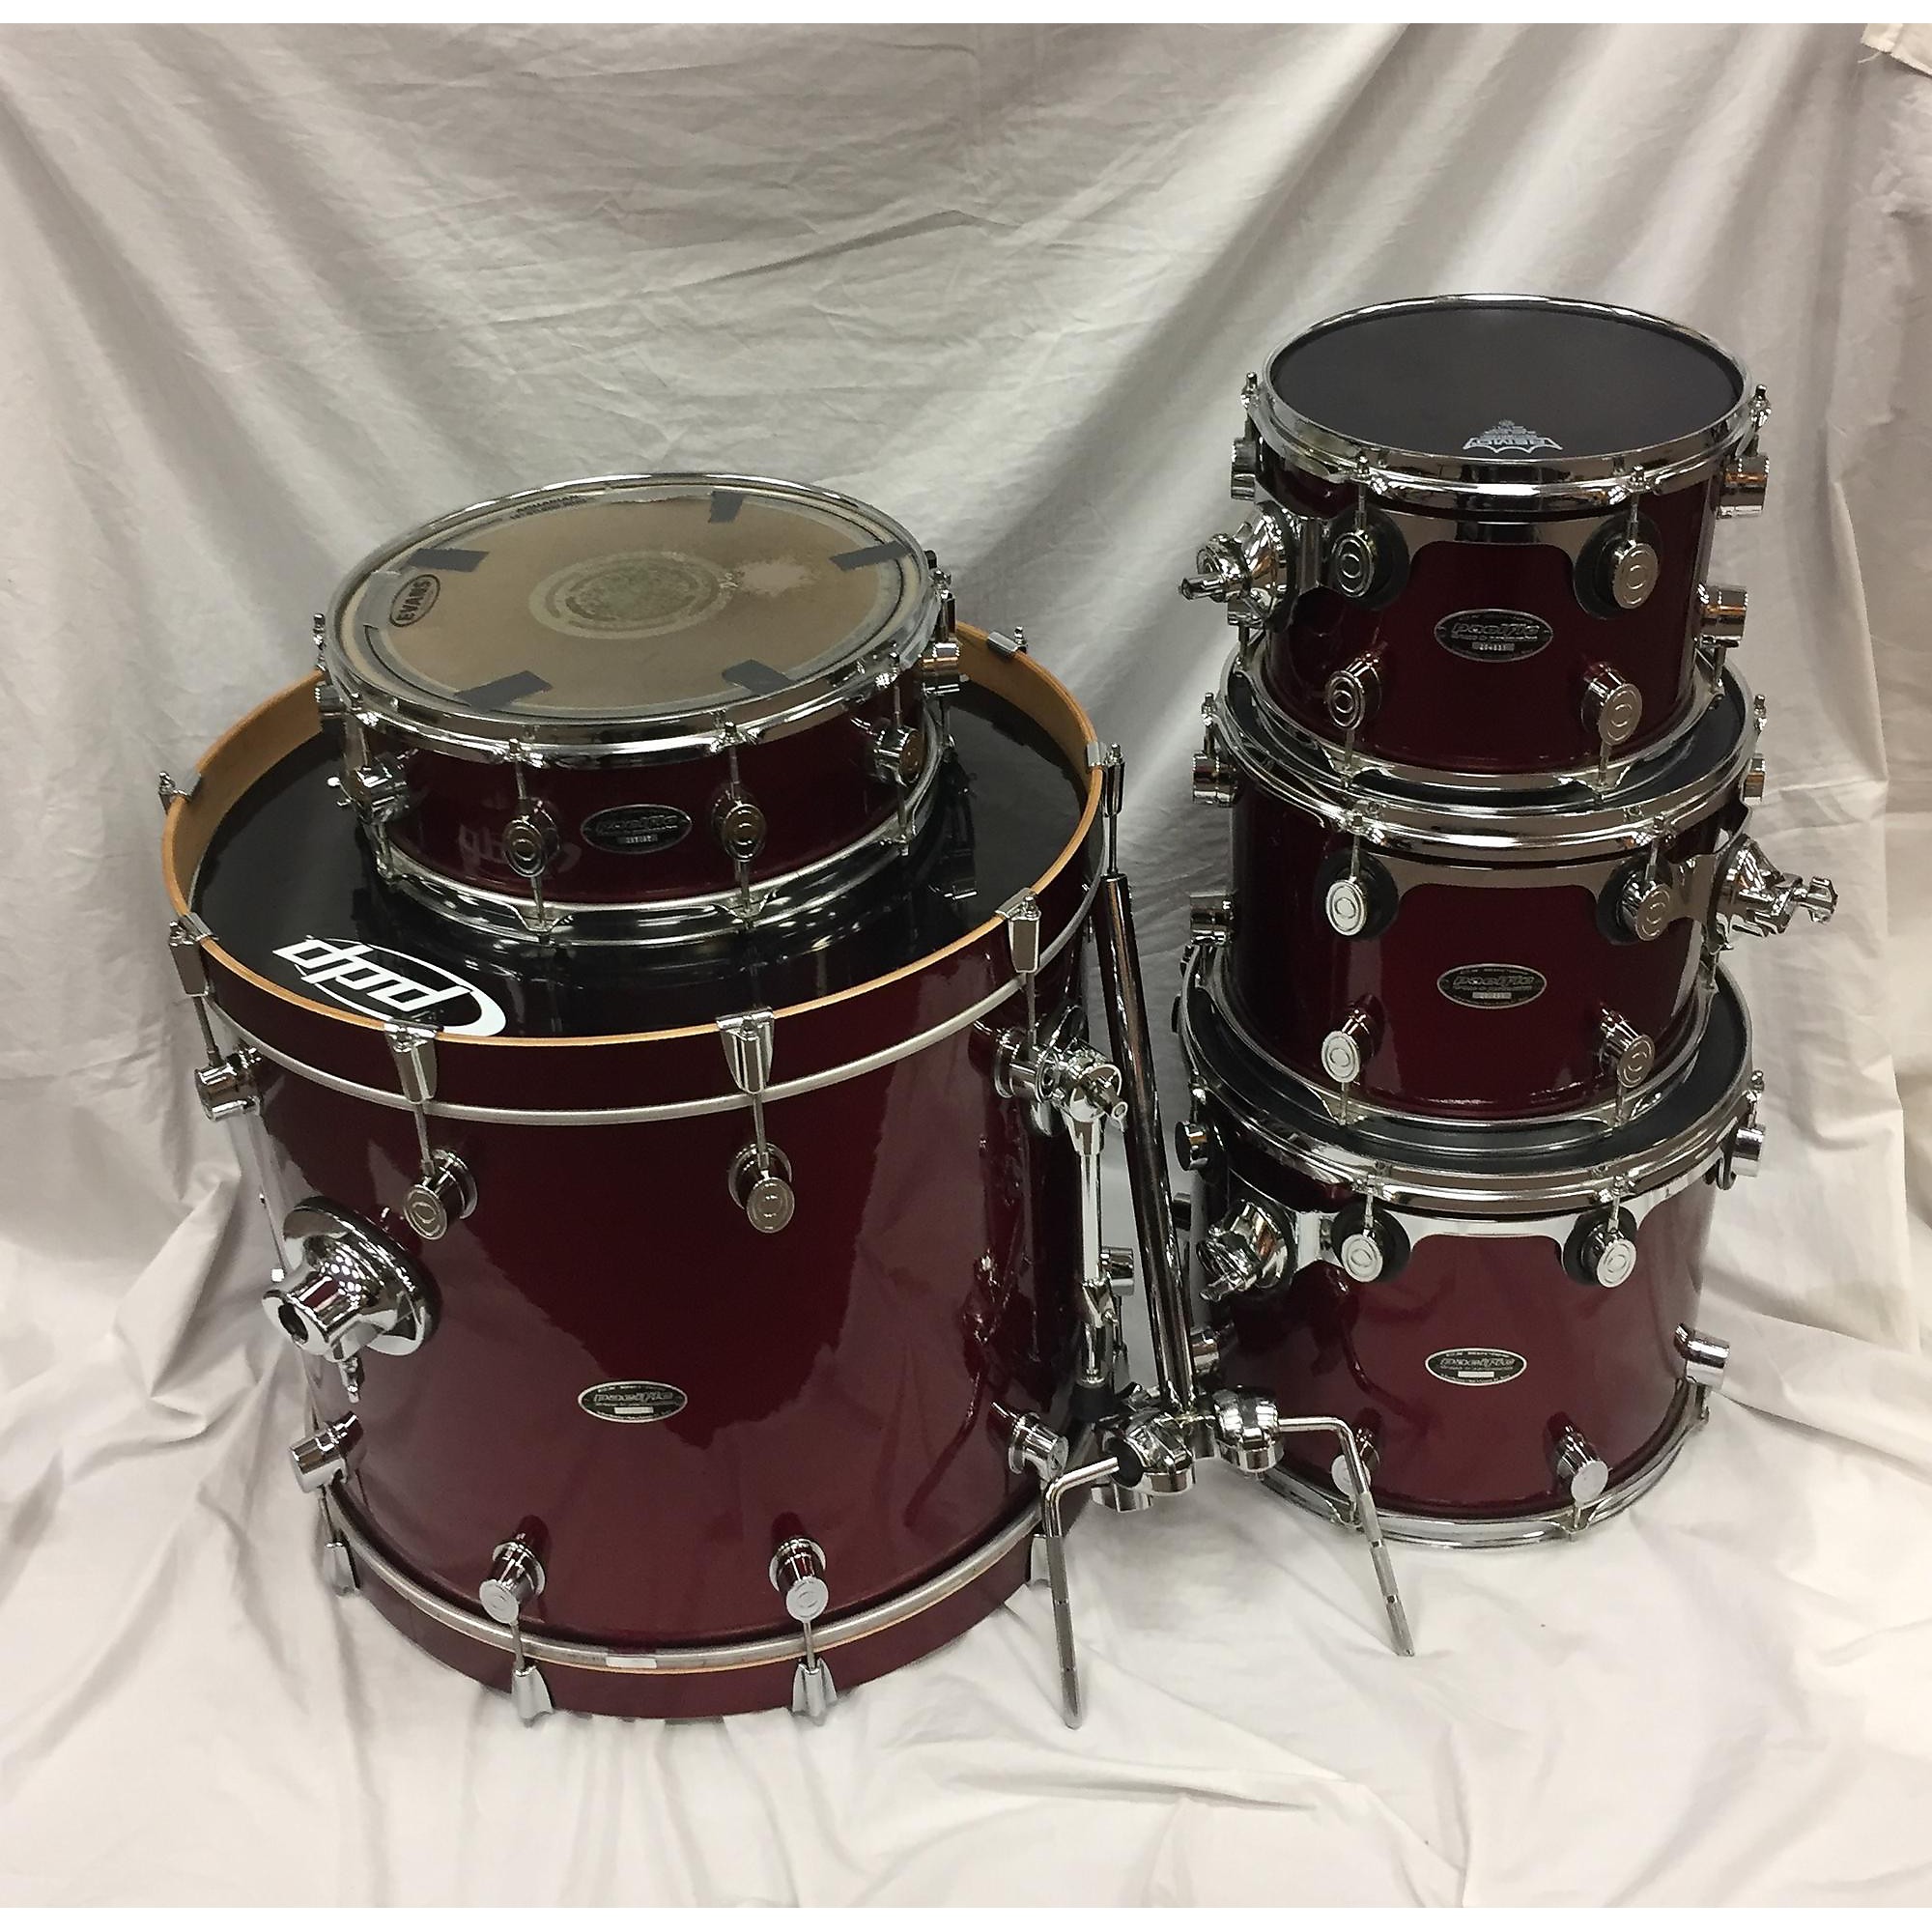 Used PDP by DW Pacific Series Drum Kit Drum Kit Candy Apple